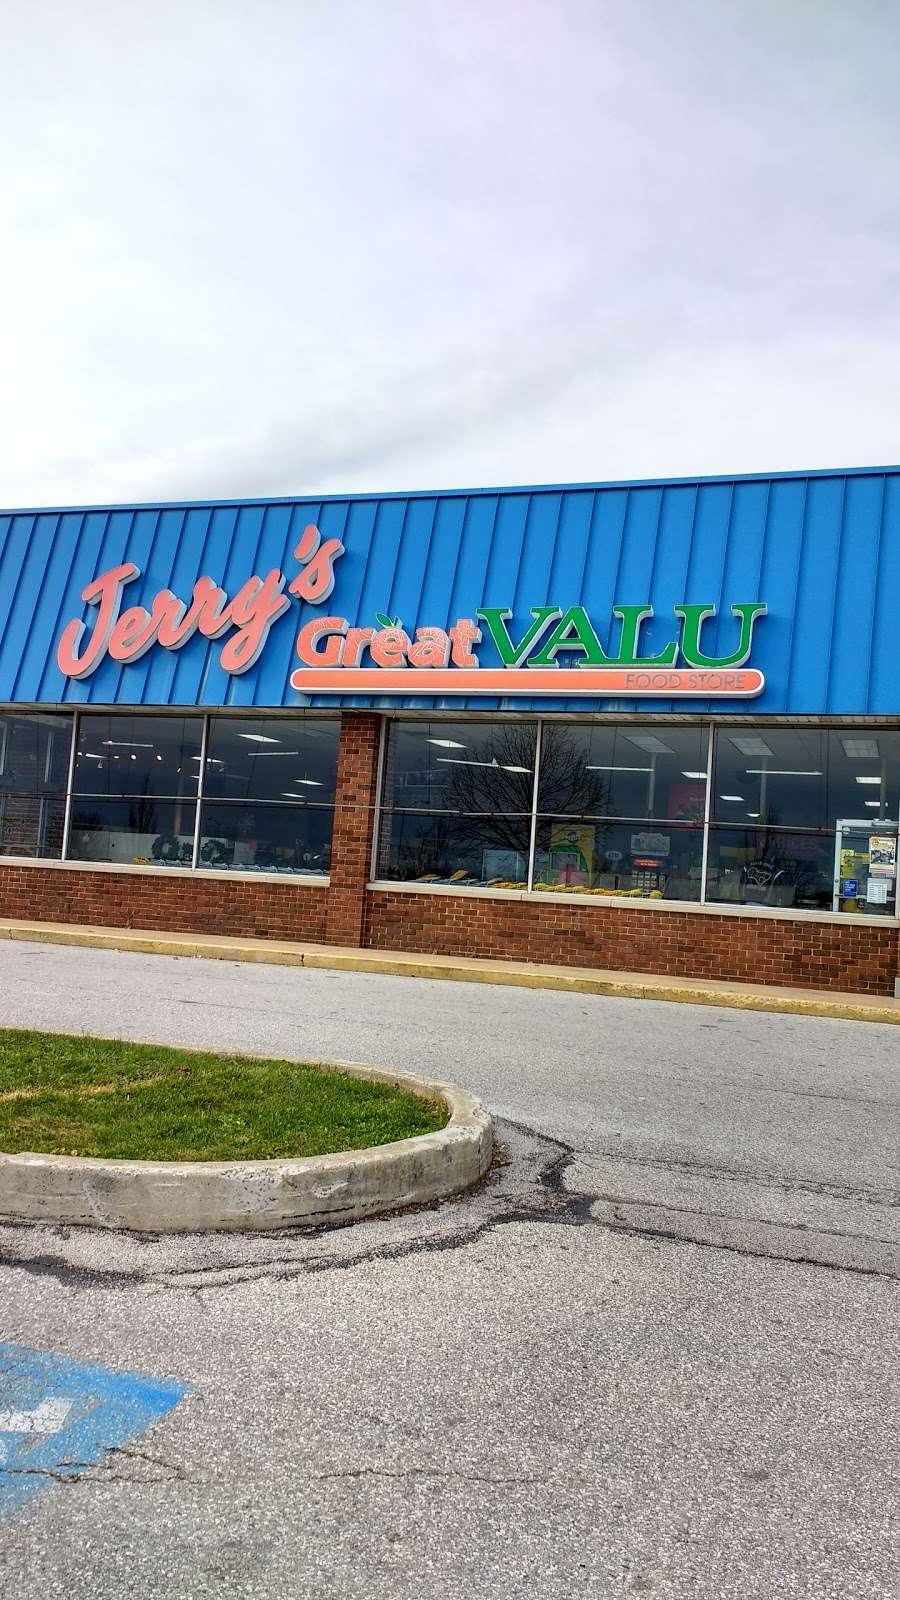 Jerrys Great Valu | 1 Dairyland Square, Red Lion, PA 17356 | Phone: (717) 244-7077